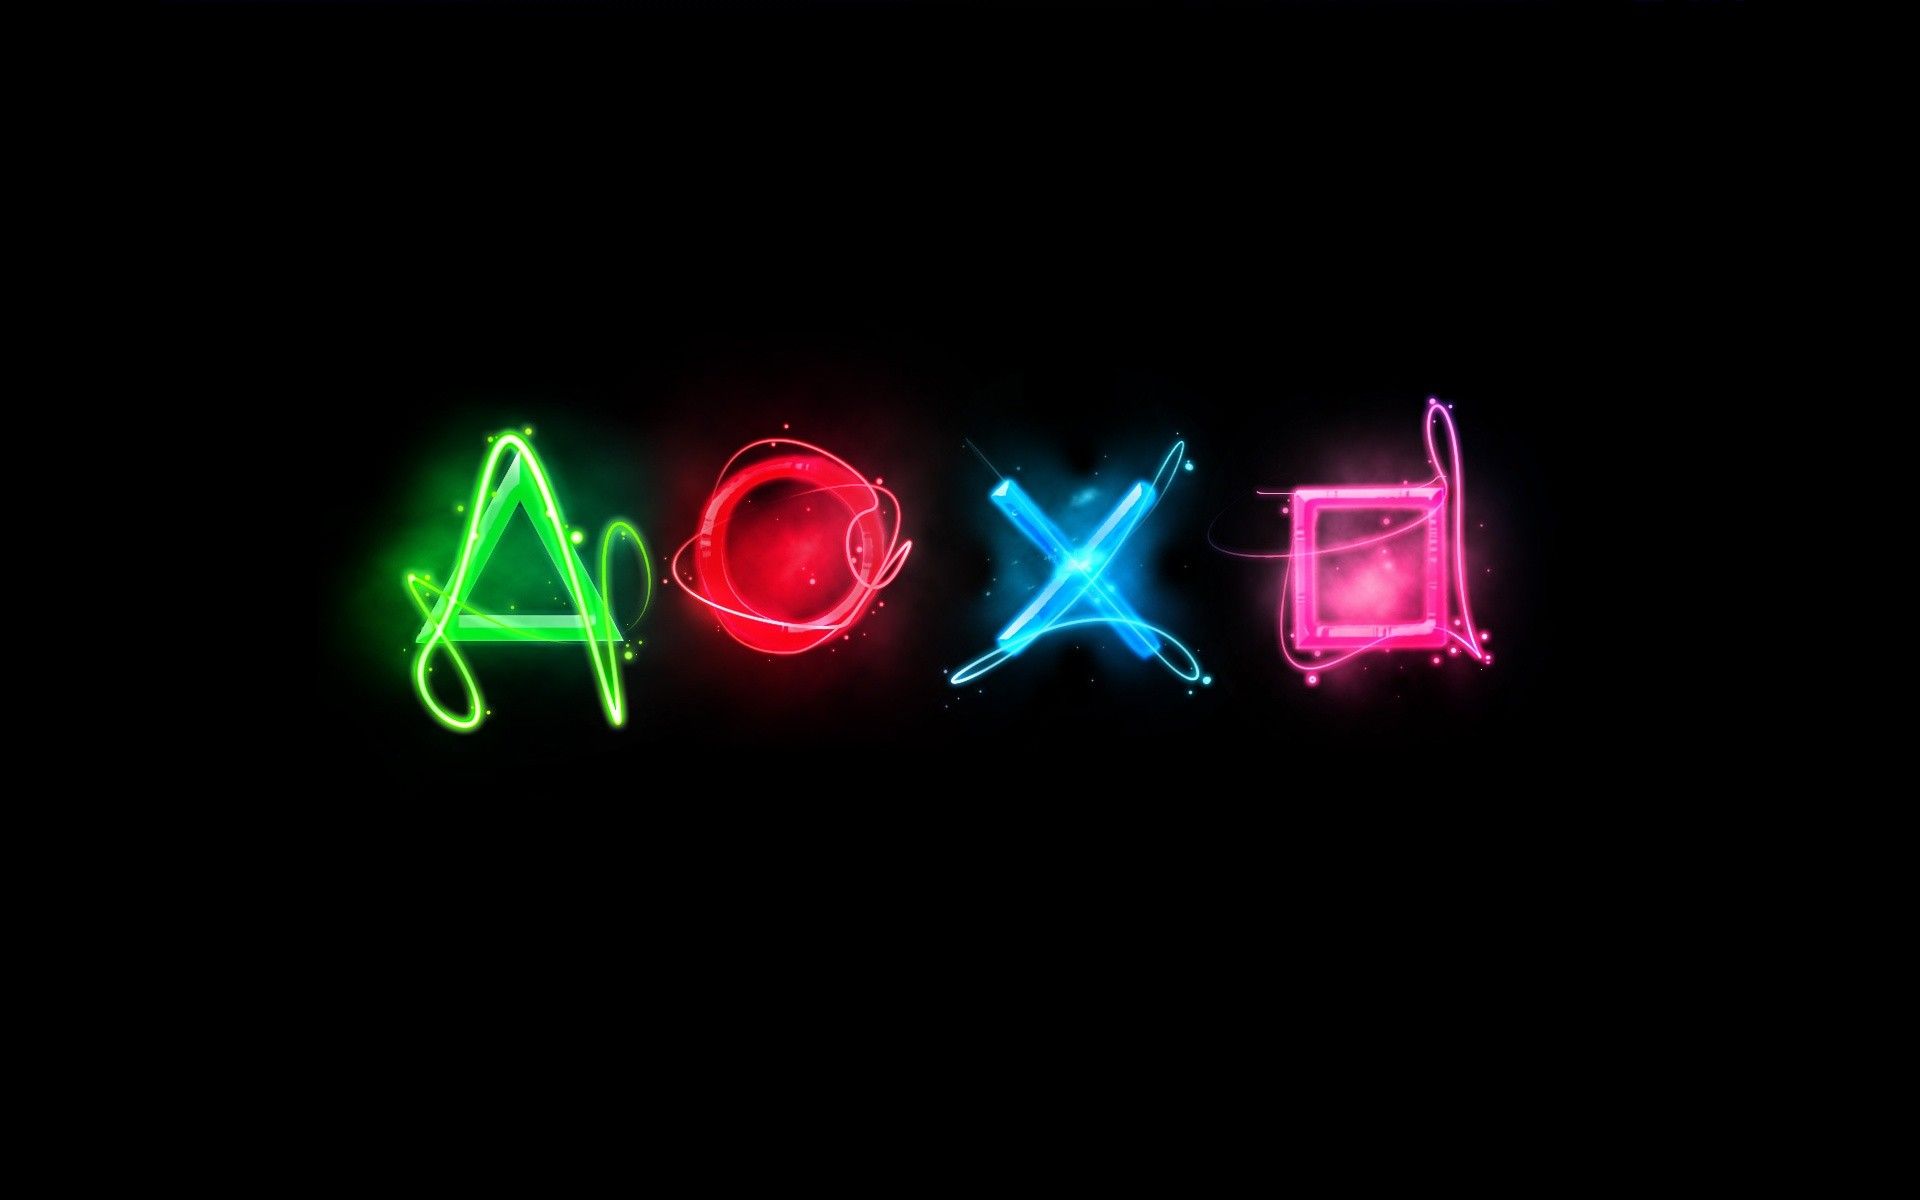 Wallpaper, colorful, black, digital art, video games, simple background, abstract, minimalism, text, logo, circle, PlayStation, neon sign, light, lighting, shape, number, computer wallpaper, font, electronic signage 1920x1200